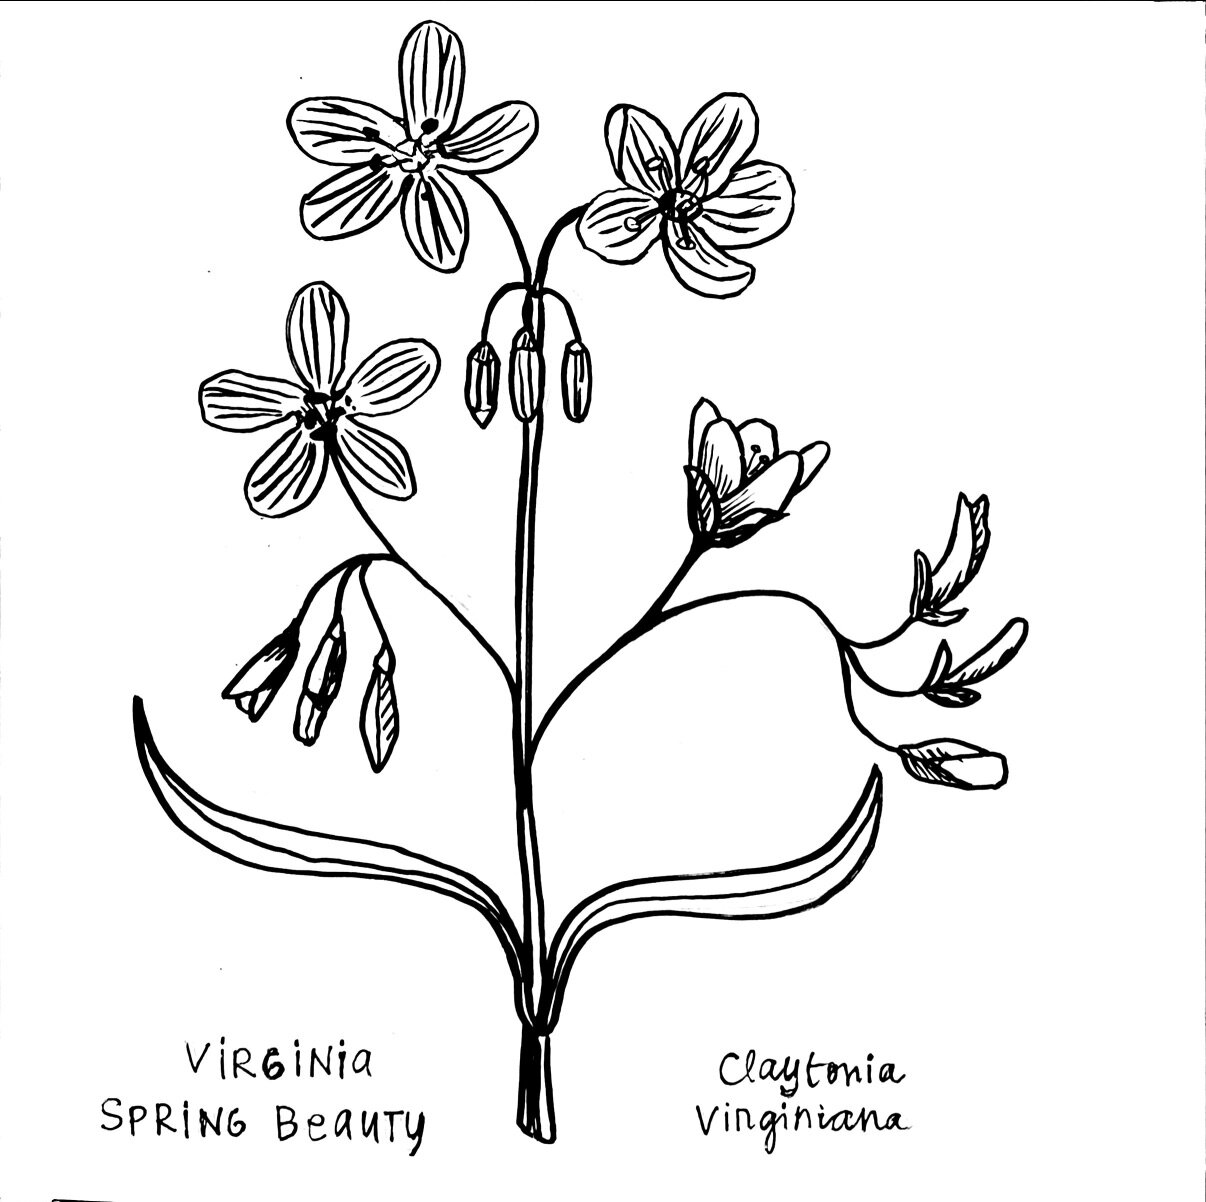 Day 4. Virginia Springbeauty. Another of the spring ephemerals. These flowers are always so perfect that they look like they're posing for photos. The petals are white with pink stripes, screaming out for color. 

These grow out of an underground pot